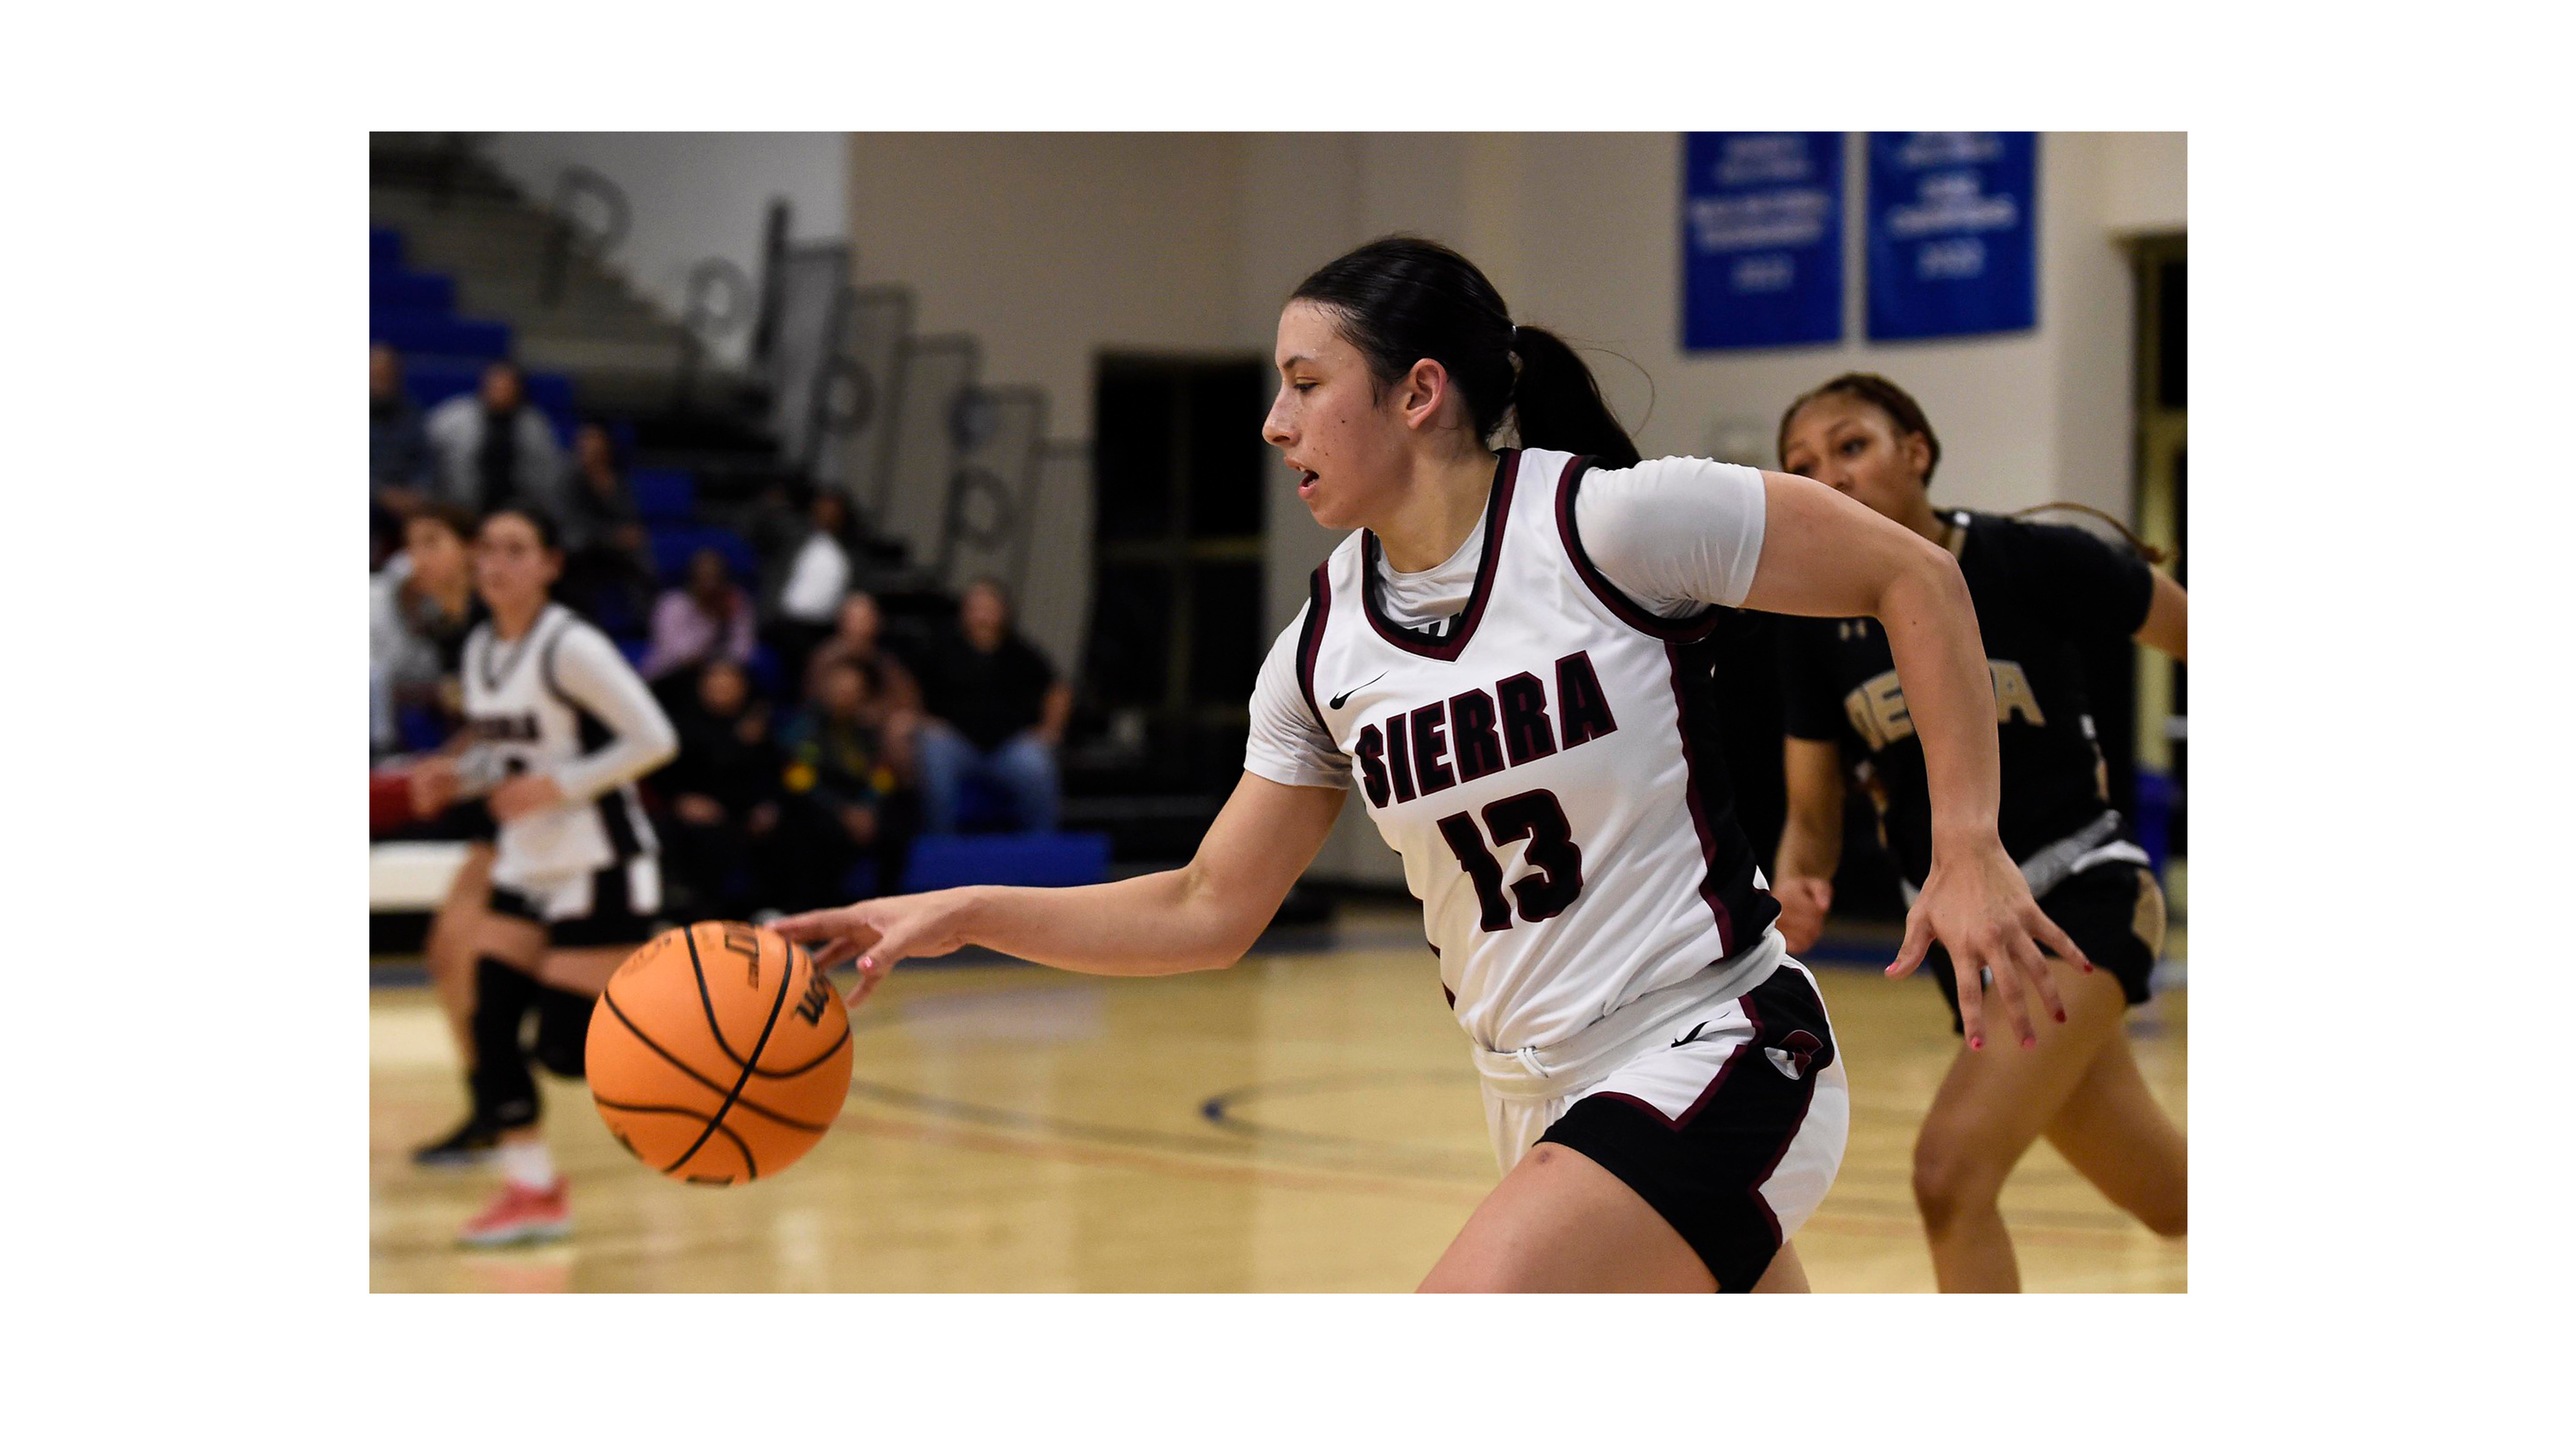 Sierra's 13 dribble down court during Delta game.